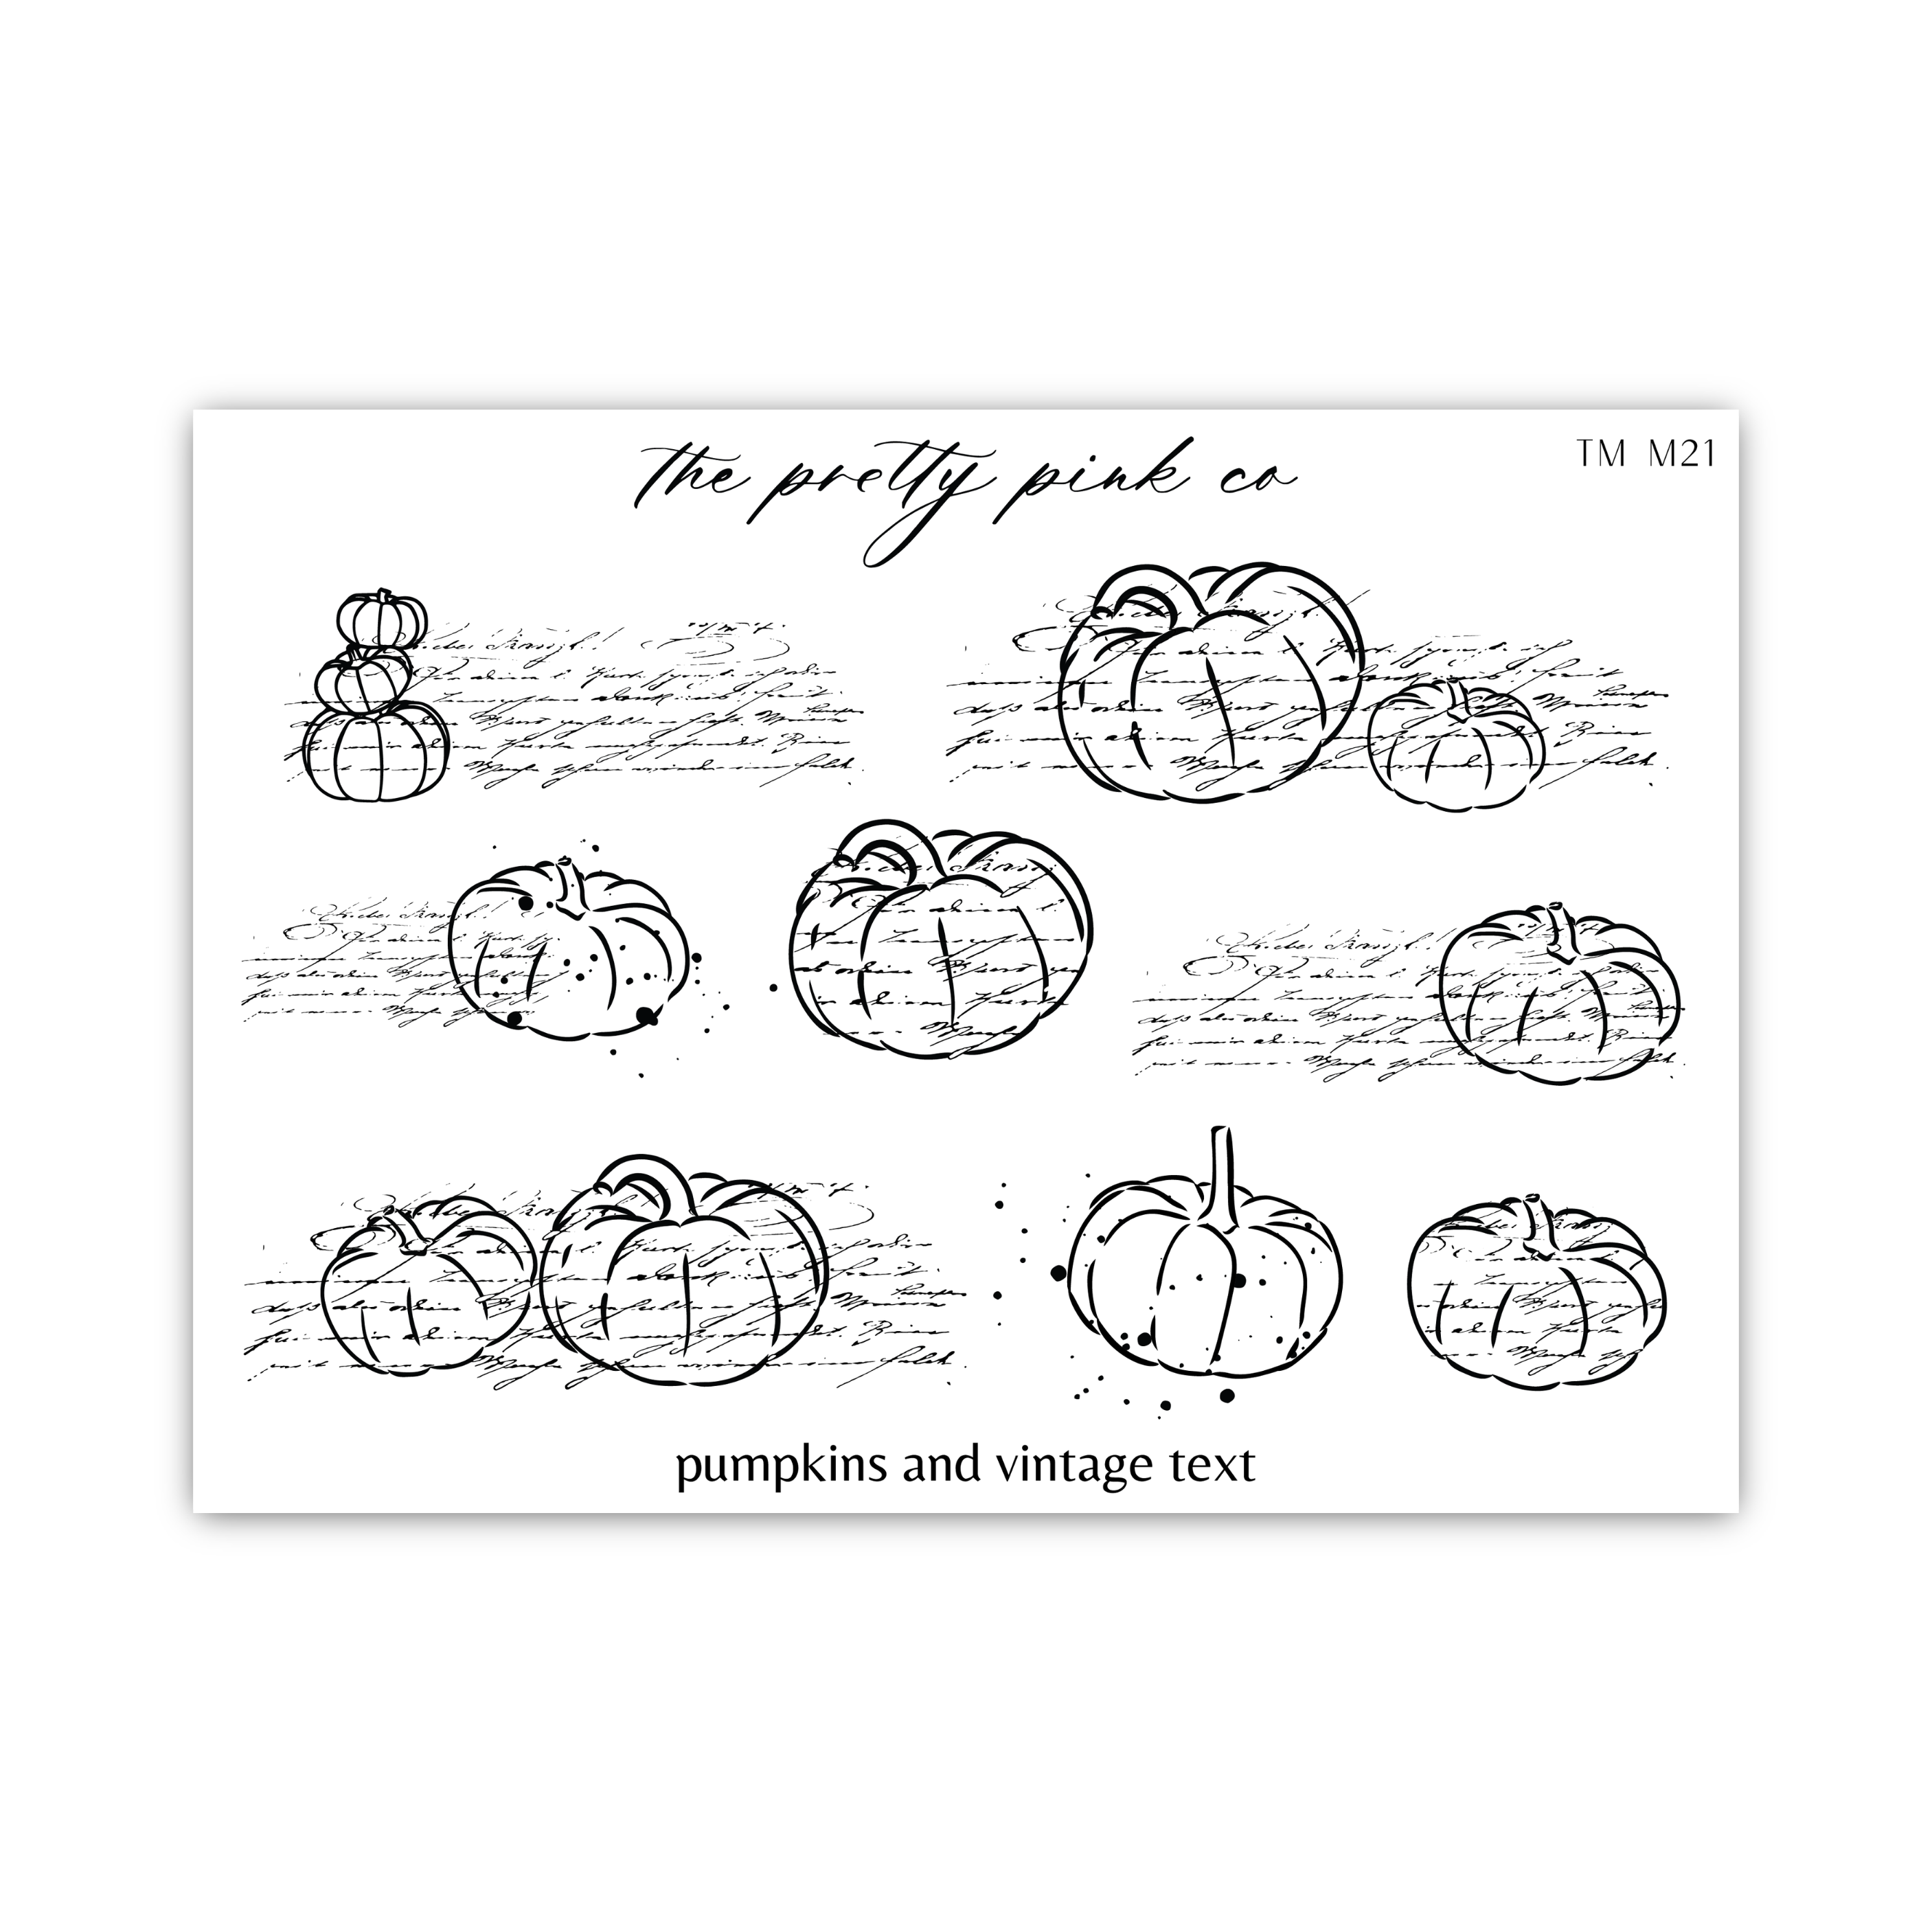 a drawing of pumpkins and vintage text